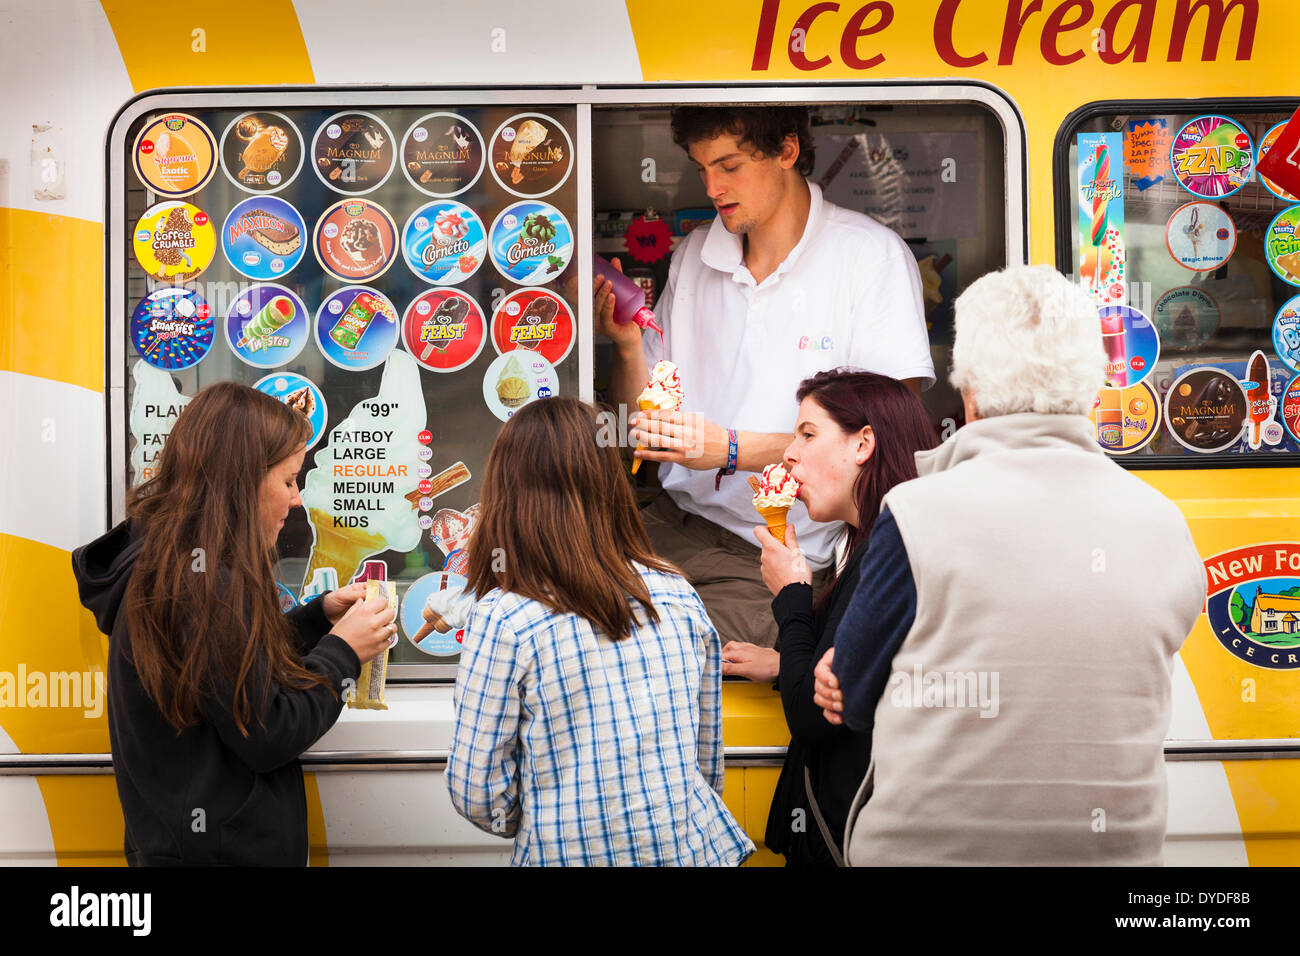 People buying ice creams from a van. Stock Photo